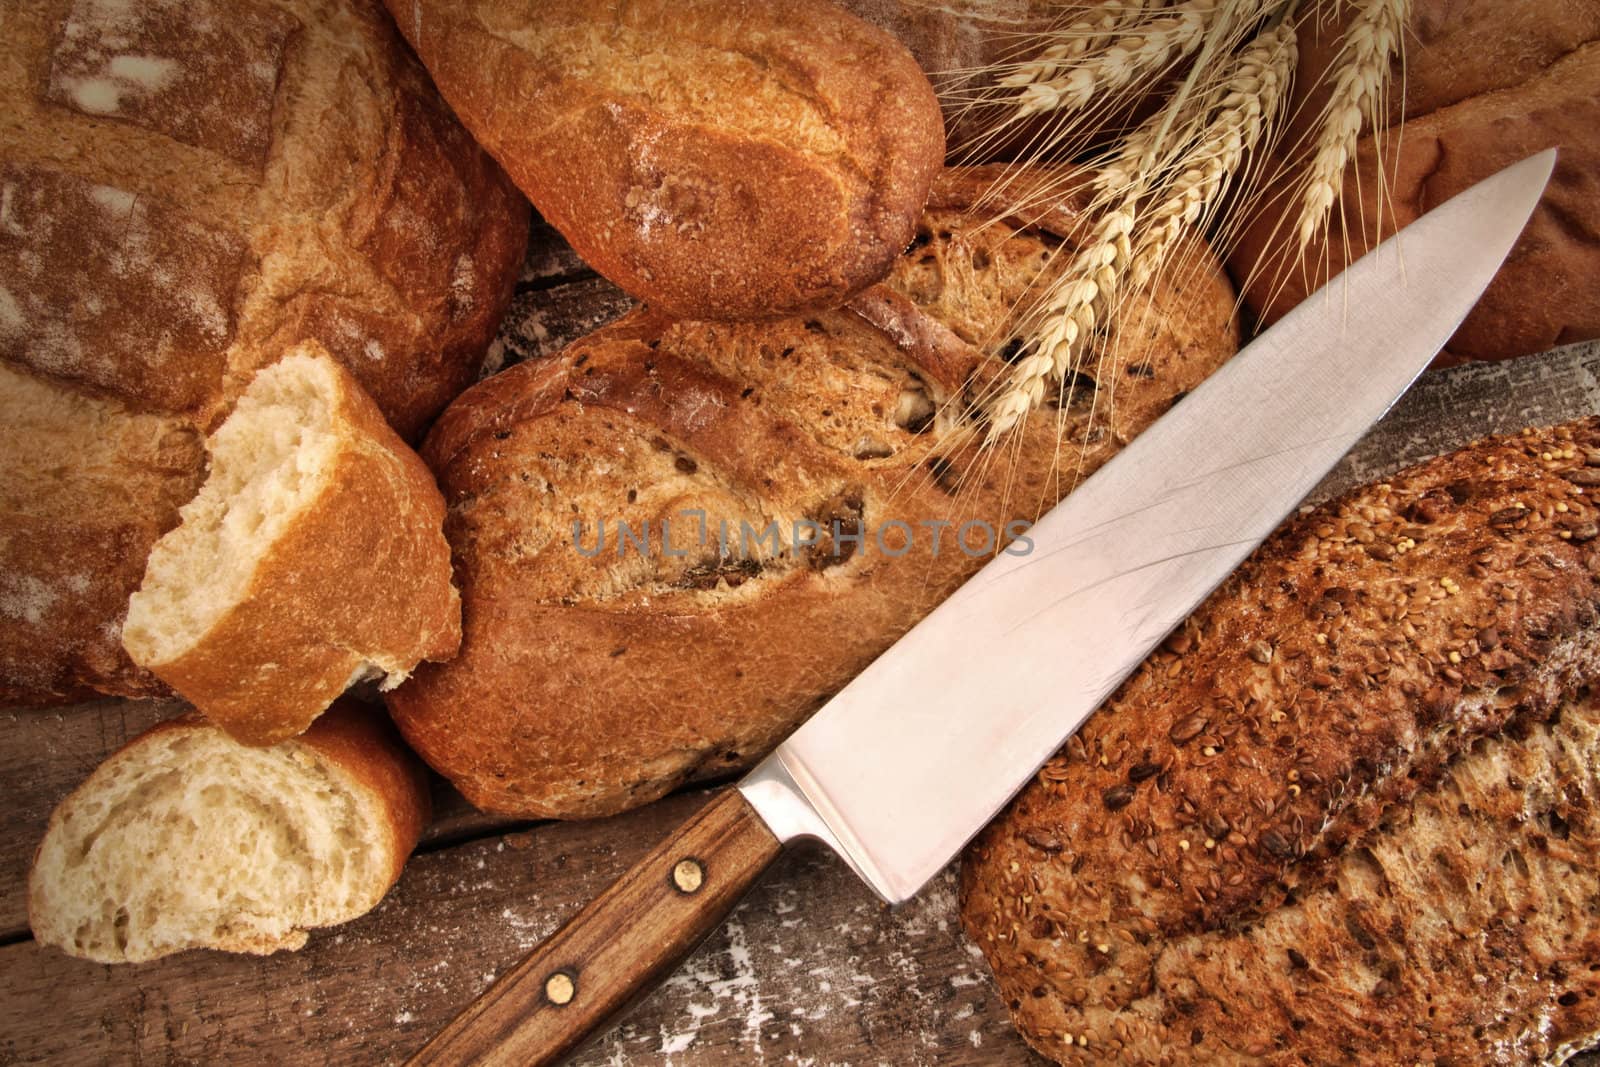 A selection of bread loaves with knife by Sandralise